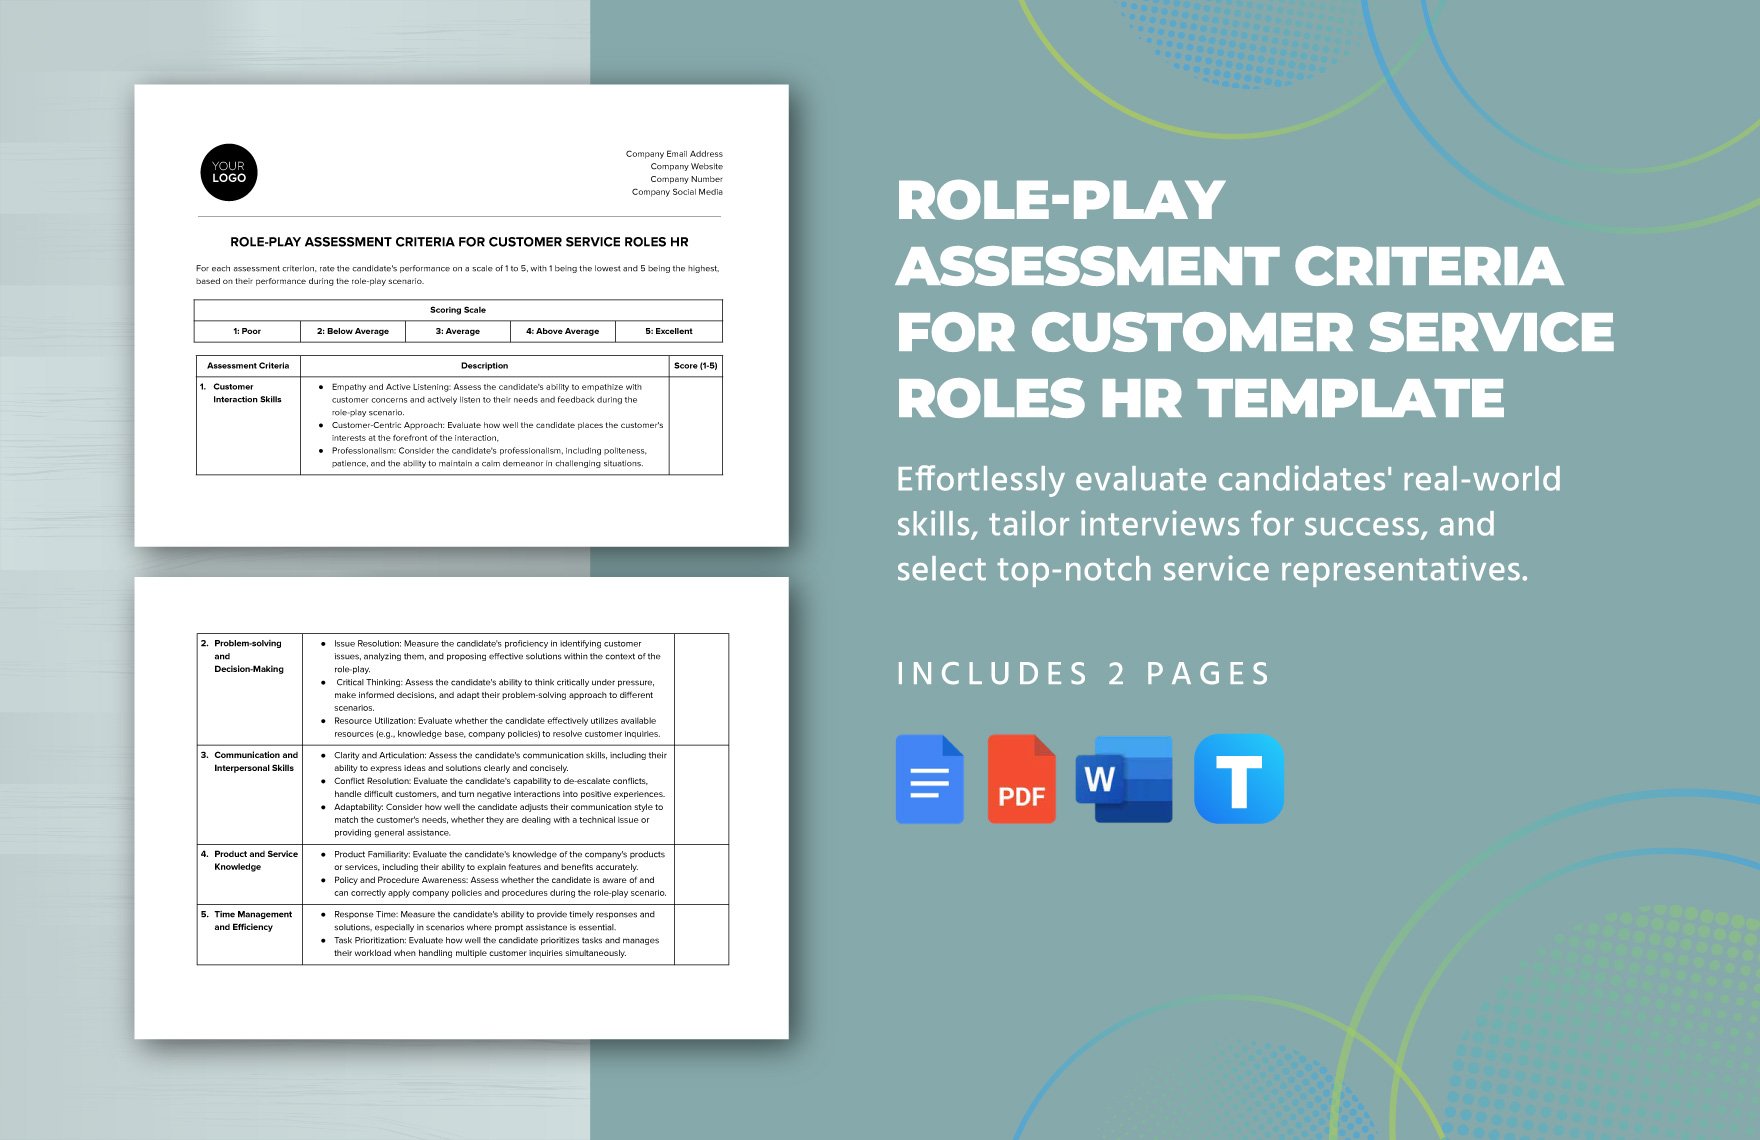 Role-play Assessment Criteria for Customer Service Roles HR Template